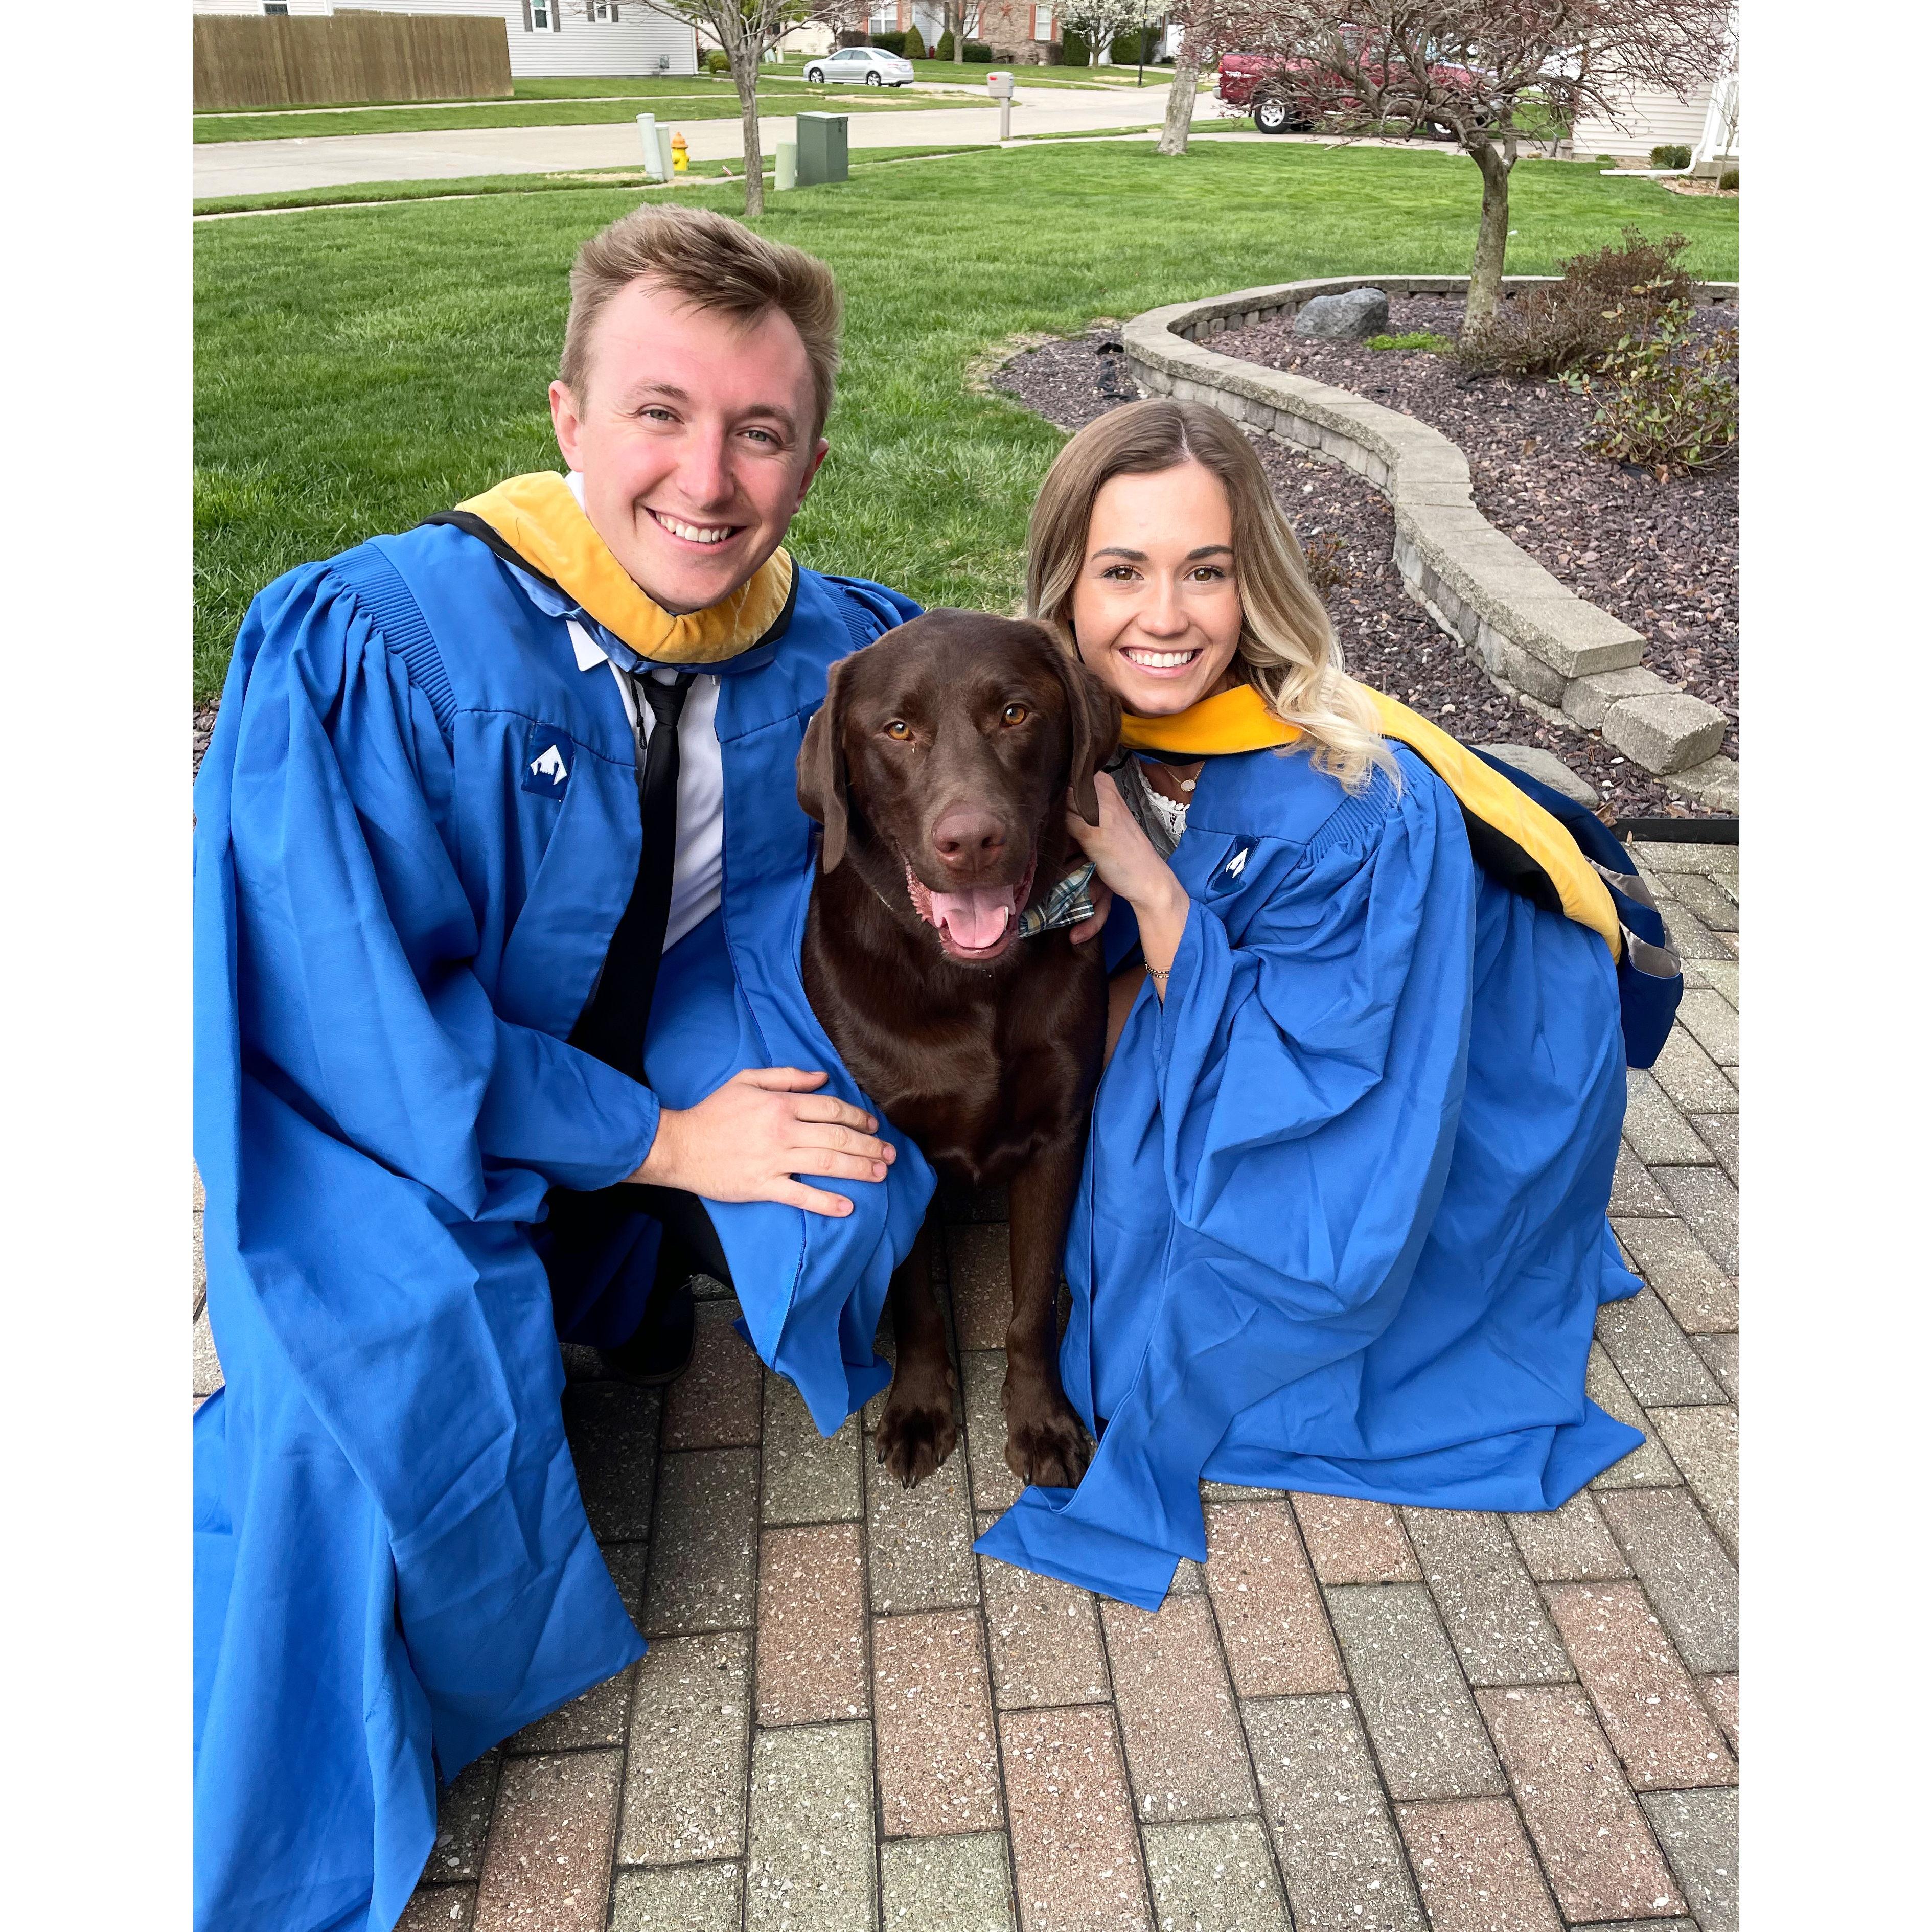 April 2022: Pre-graduation pictures with Coop, of course!